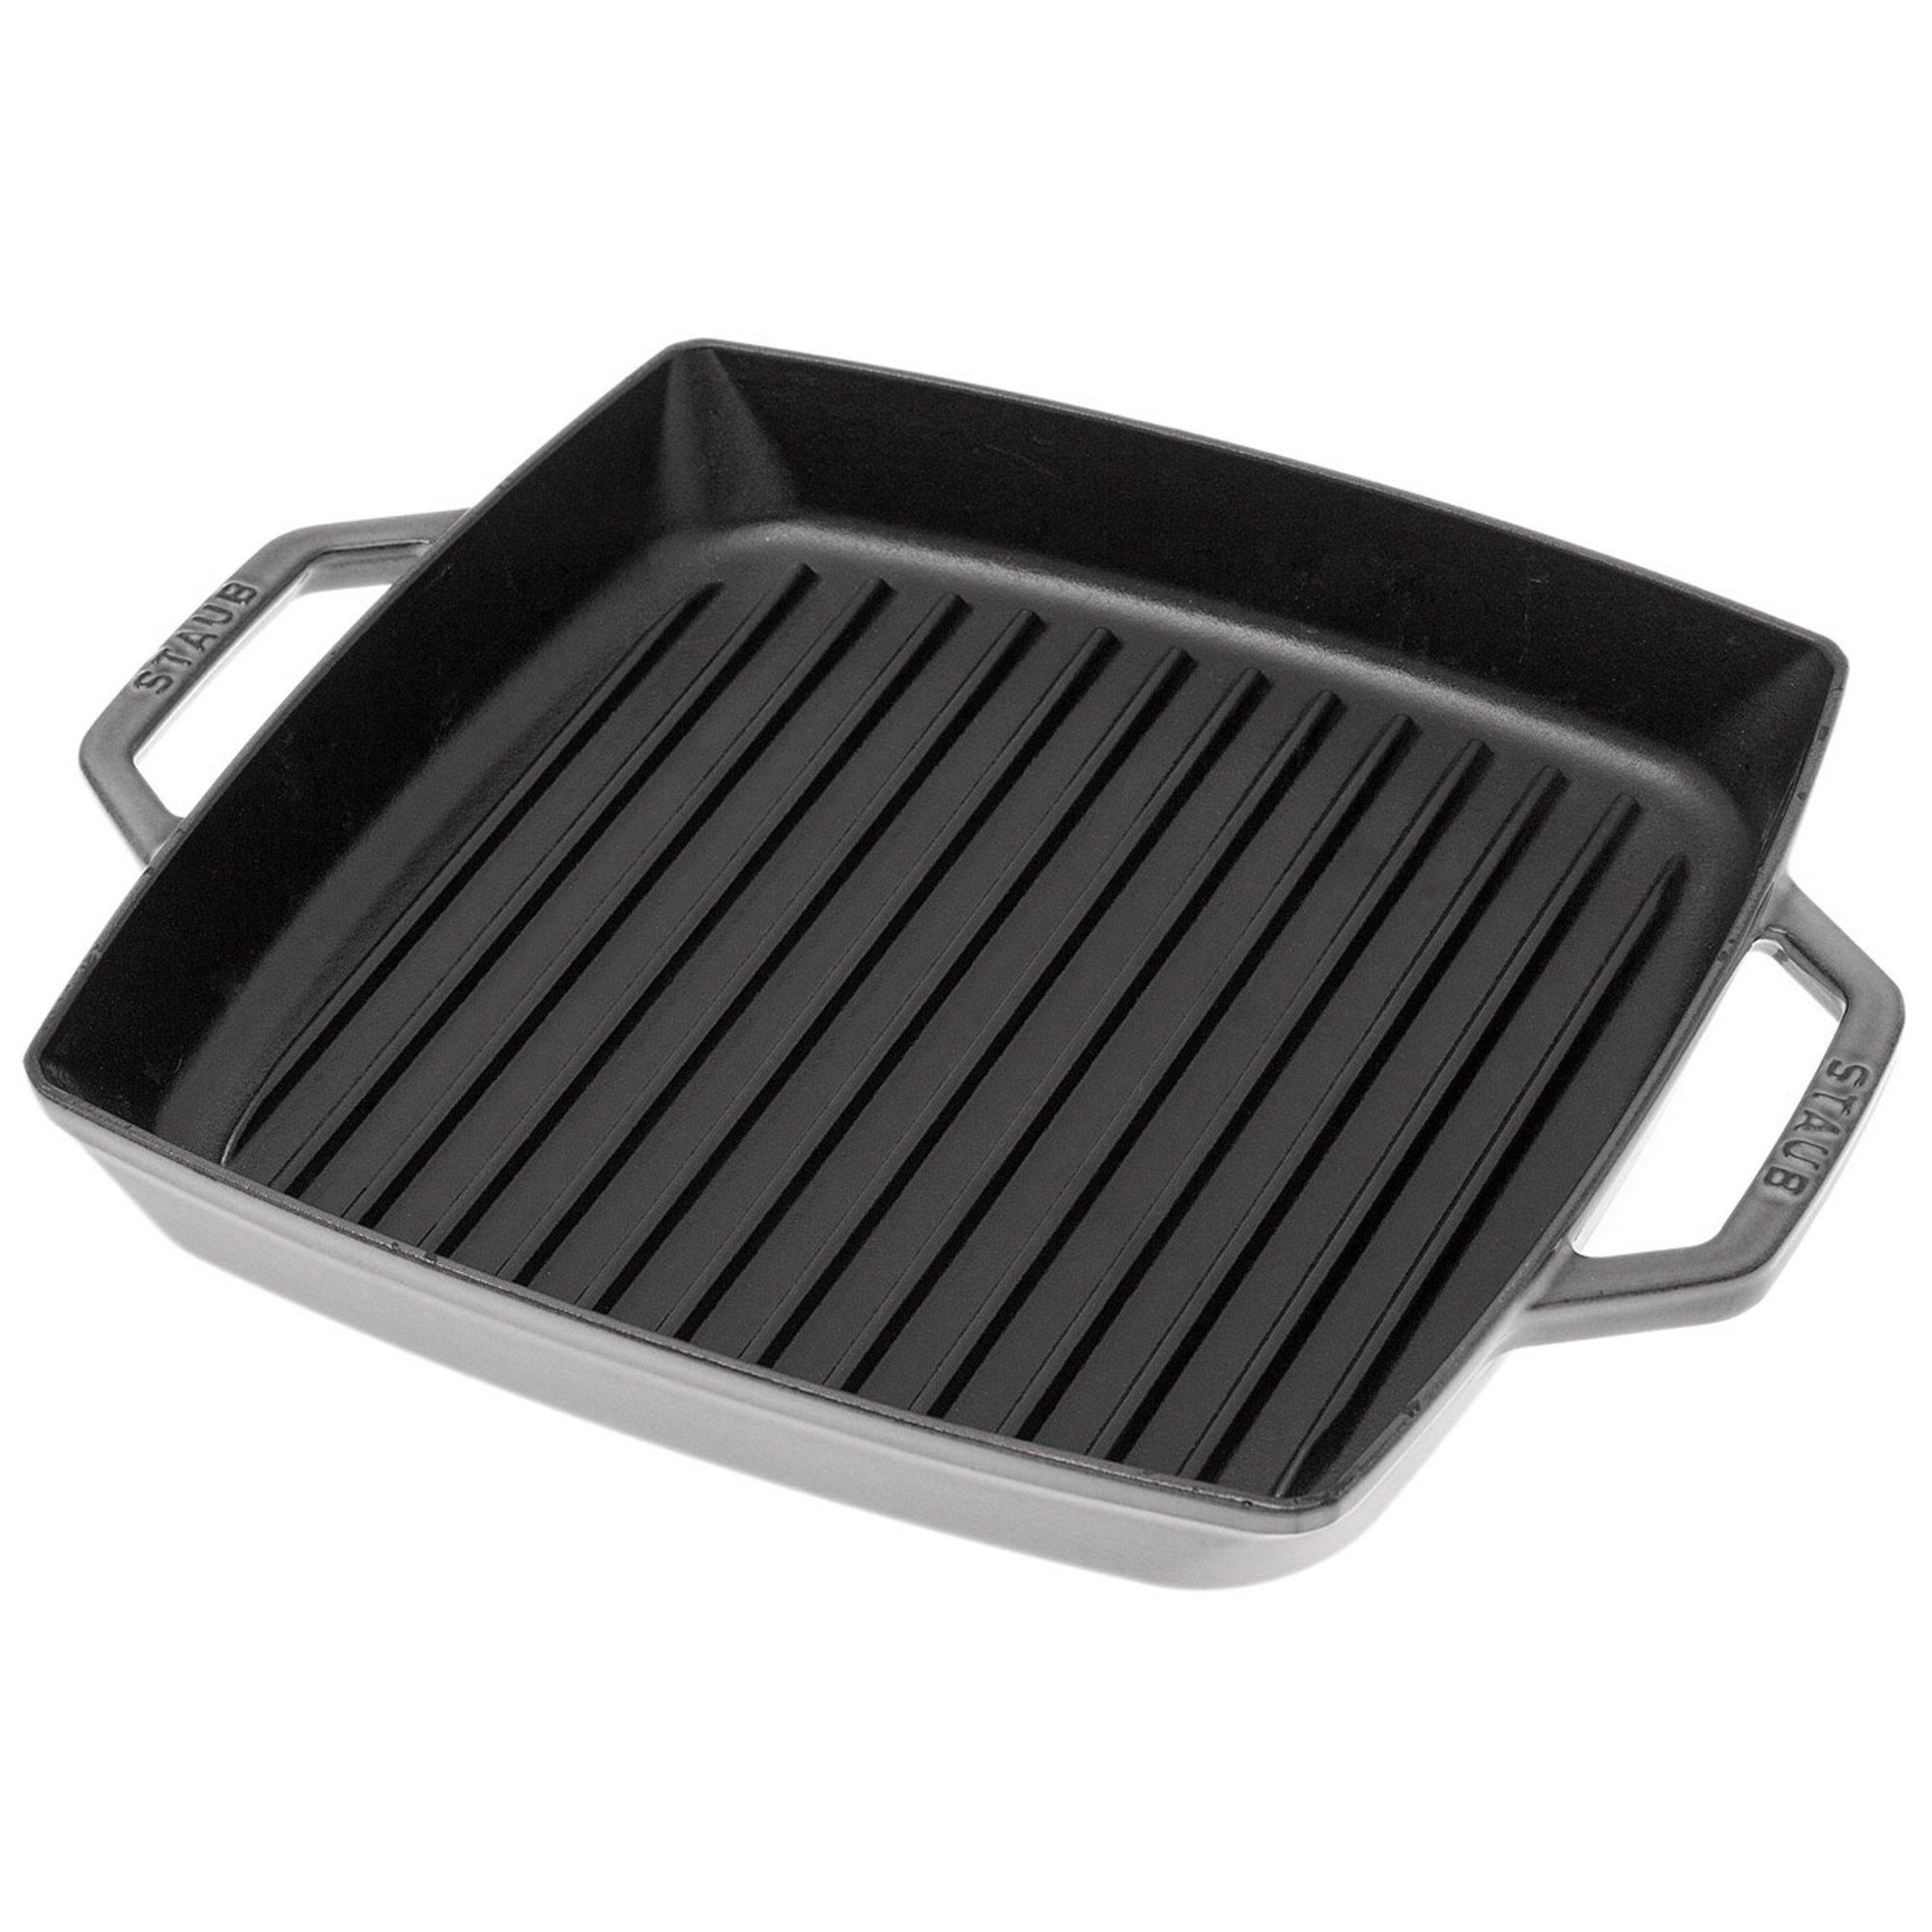 Lodge frying pan/grill pan with two handles L8GPL, diameter approx. 26 cm